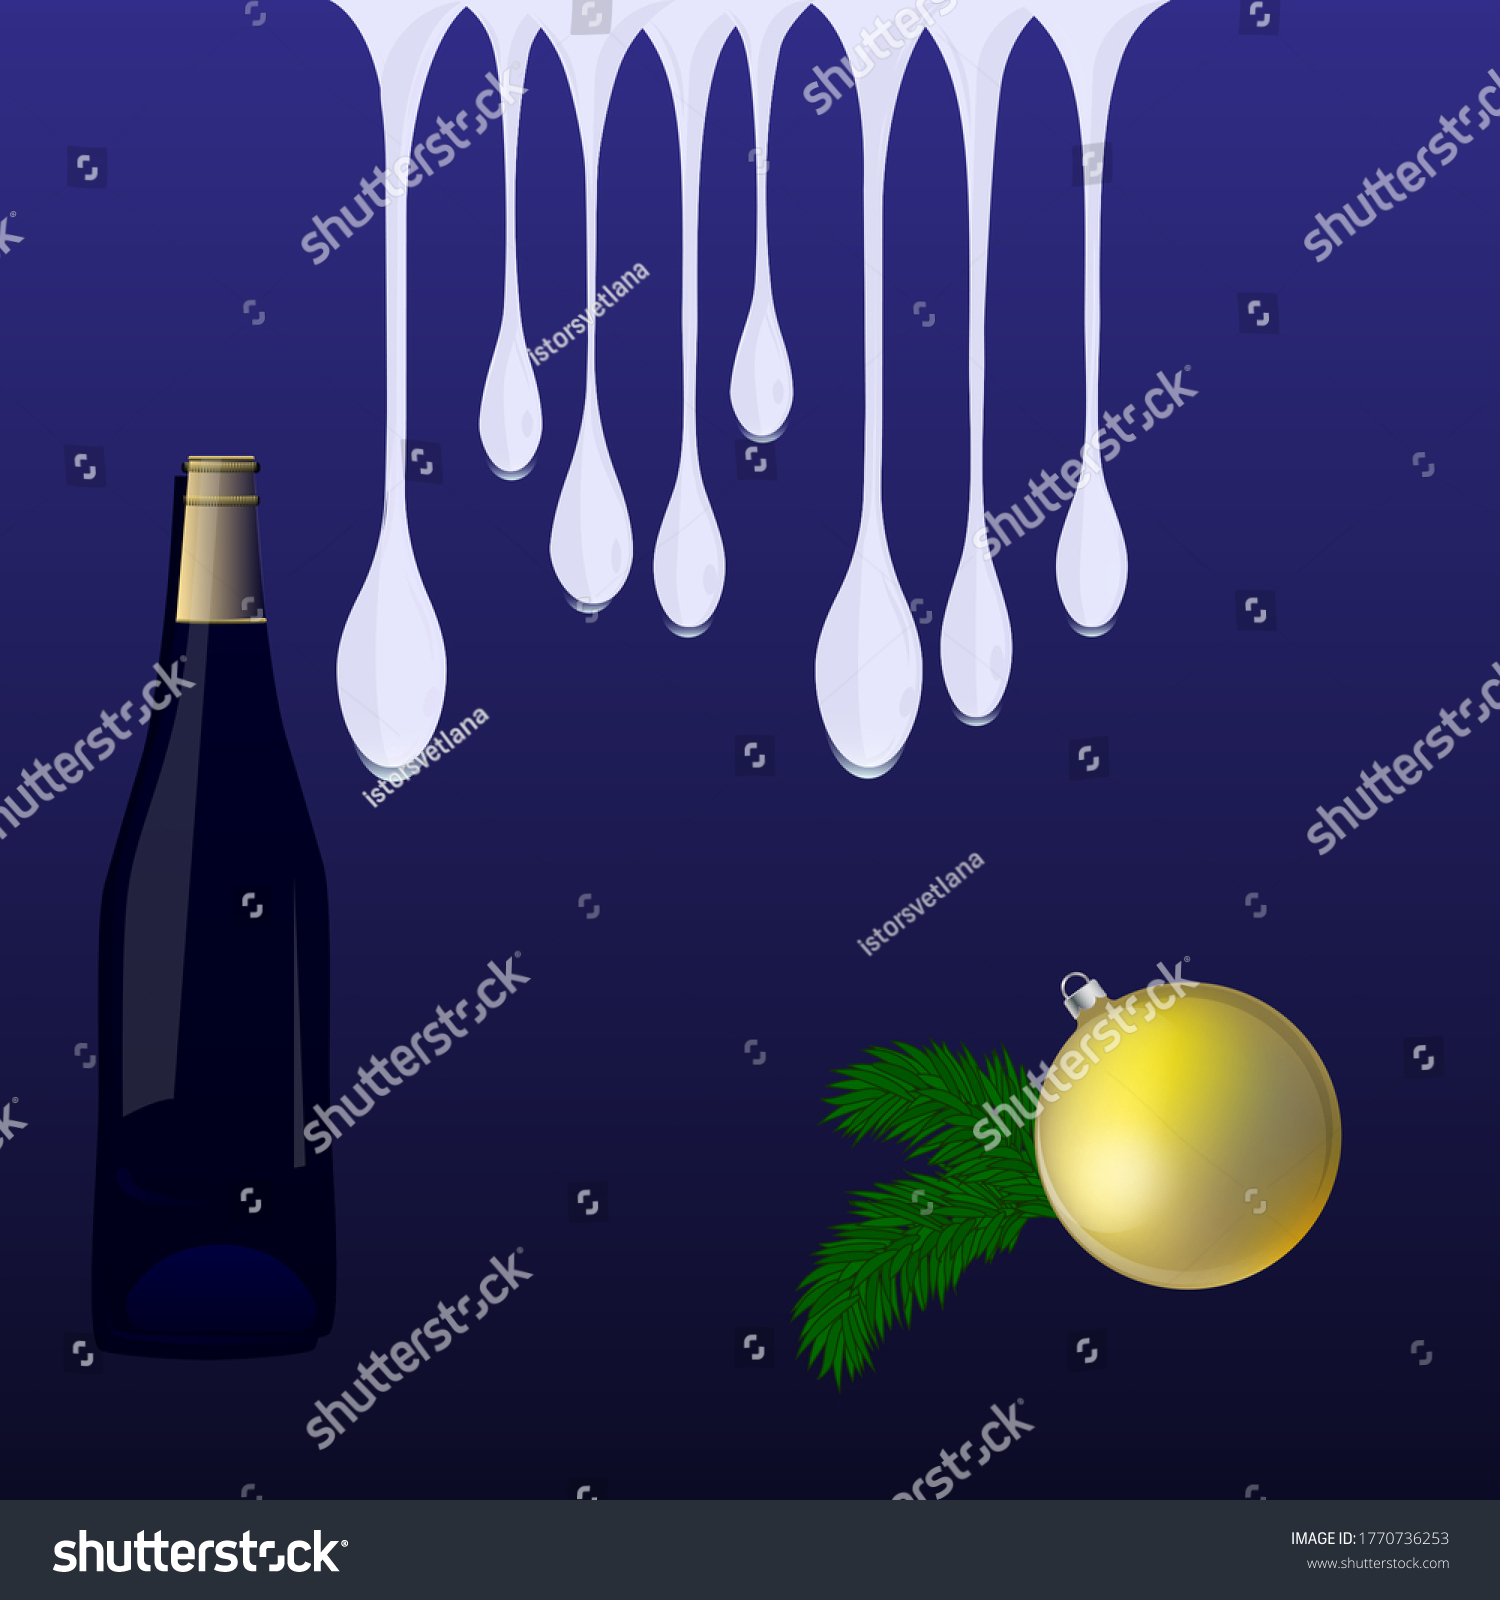 SVG of Icicles, a bottle of wine, a bright ball - dark blue background - vector. Banner. Christmas decoration. Winter holidays svg